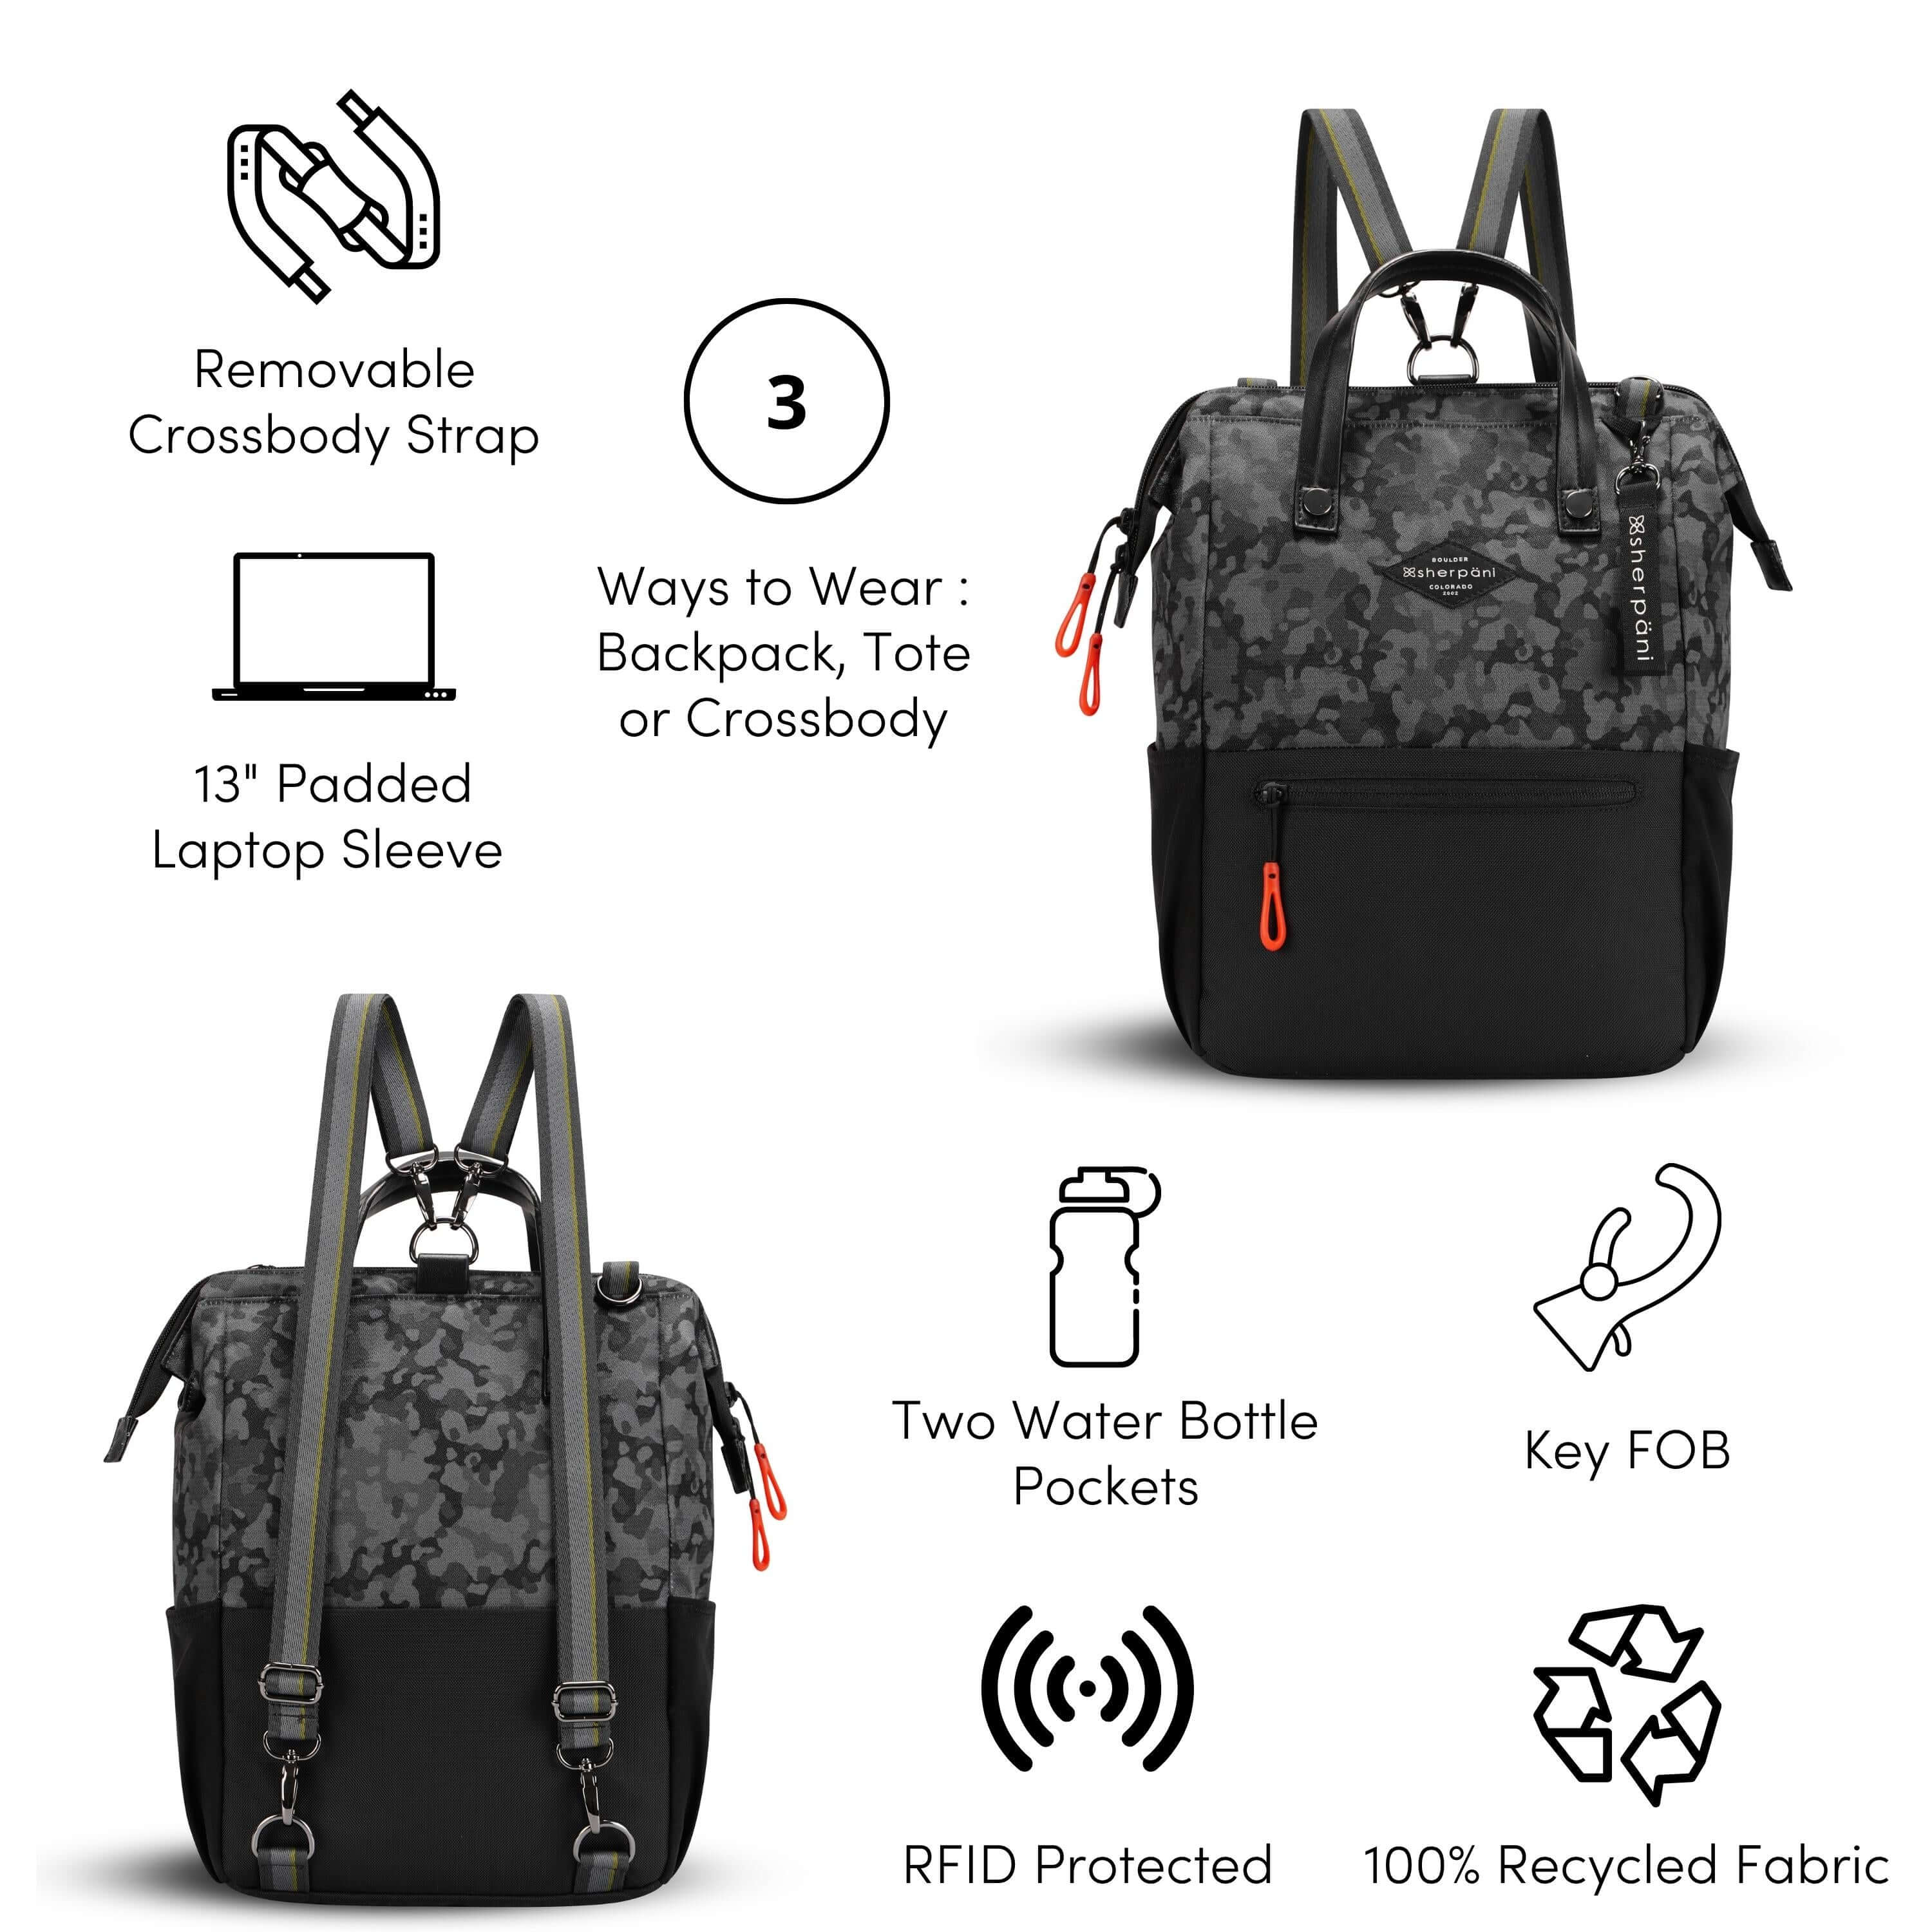 A Graphic showing the features of Sherpani’s crossbody, the Dispatch. There is a front and back view of the bag. The following features are highlighted with corresponding graphics: Removable Crossbody Strap, 13&quot; Padded Laptop Sleeve, 3 Ways to Wear: Backpack, Tote or Crossbody, Two Water Bottle Pockets, Key FOB, RFID Protected, 100% Recycled Fabric.